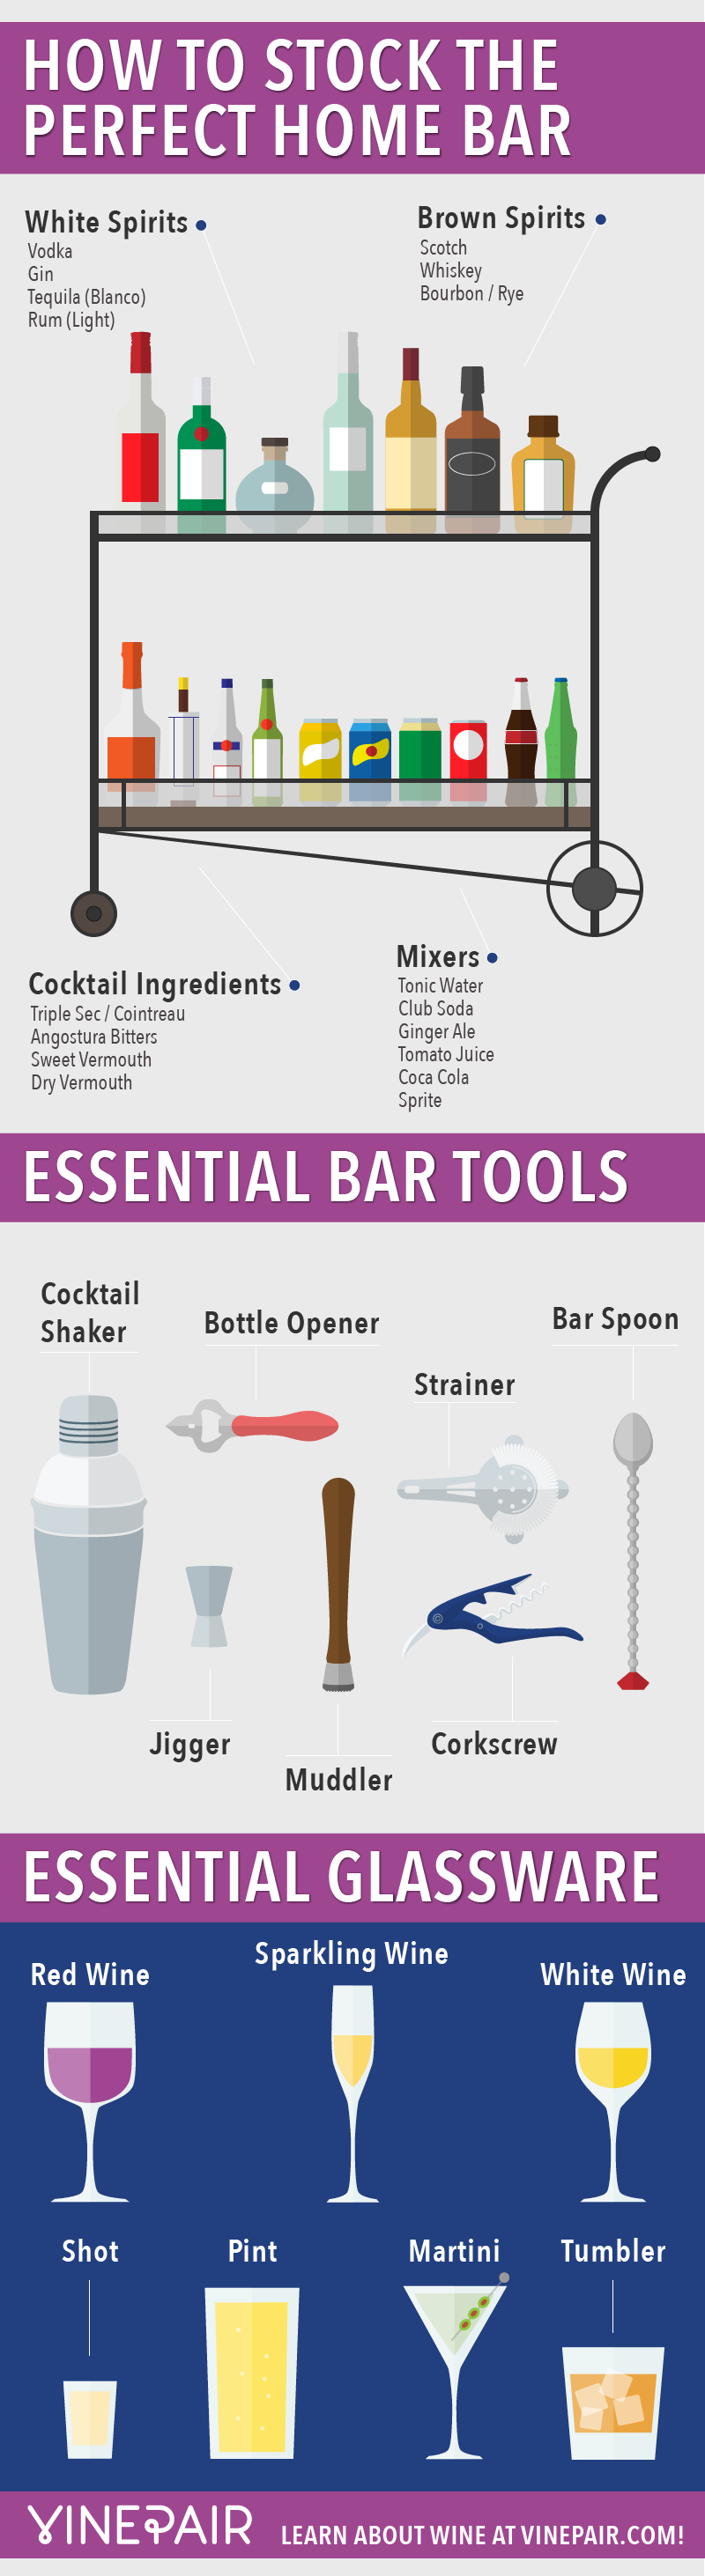 perfect-home-bar-infographic